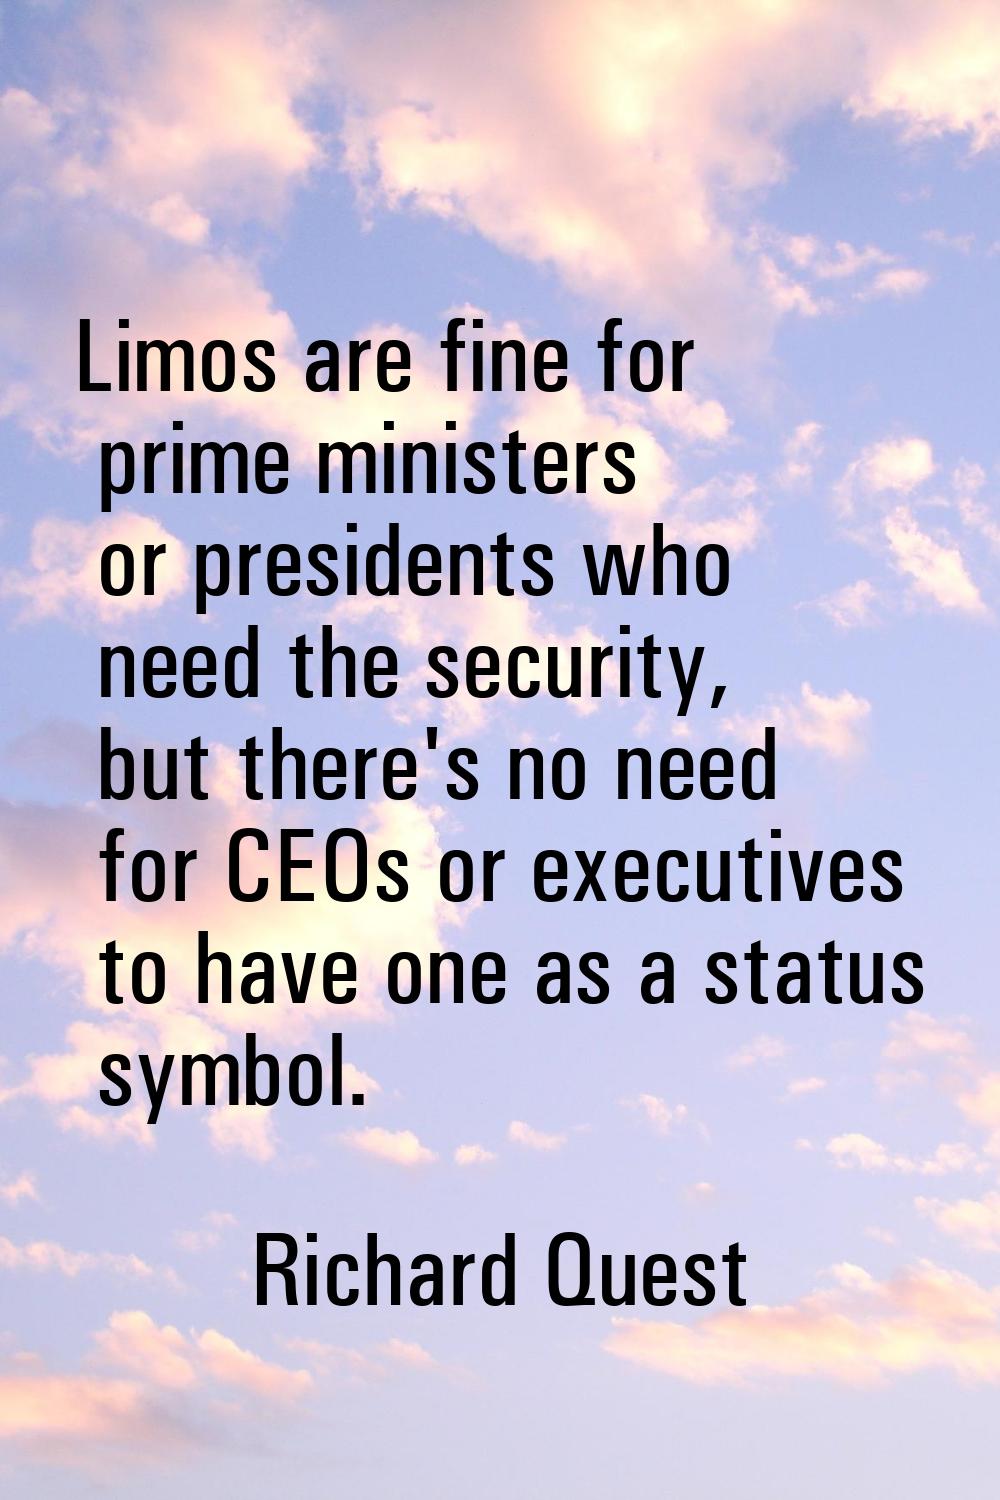 Limos are fine for prime ministers or presidents who need the security, but there's no need for CEO